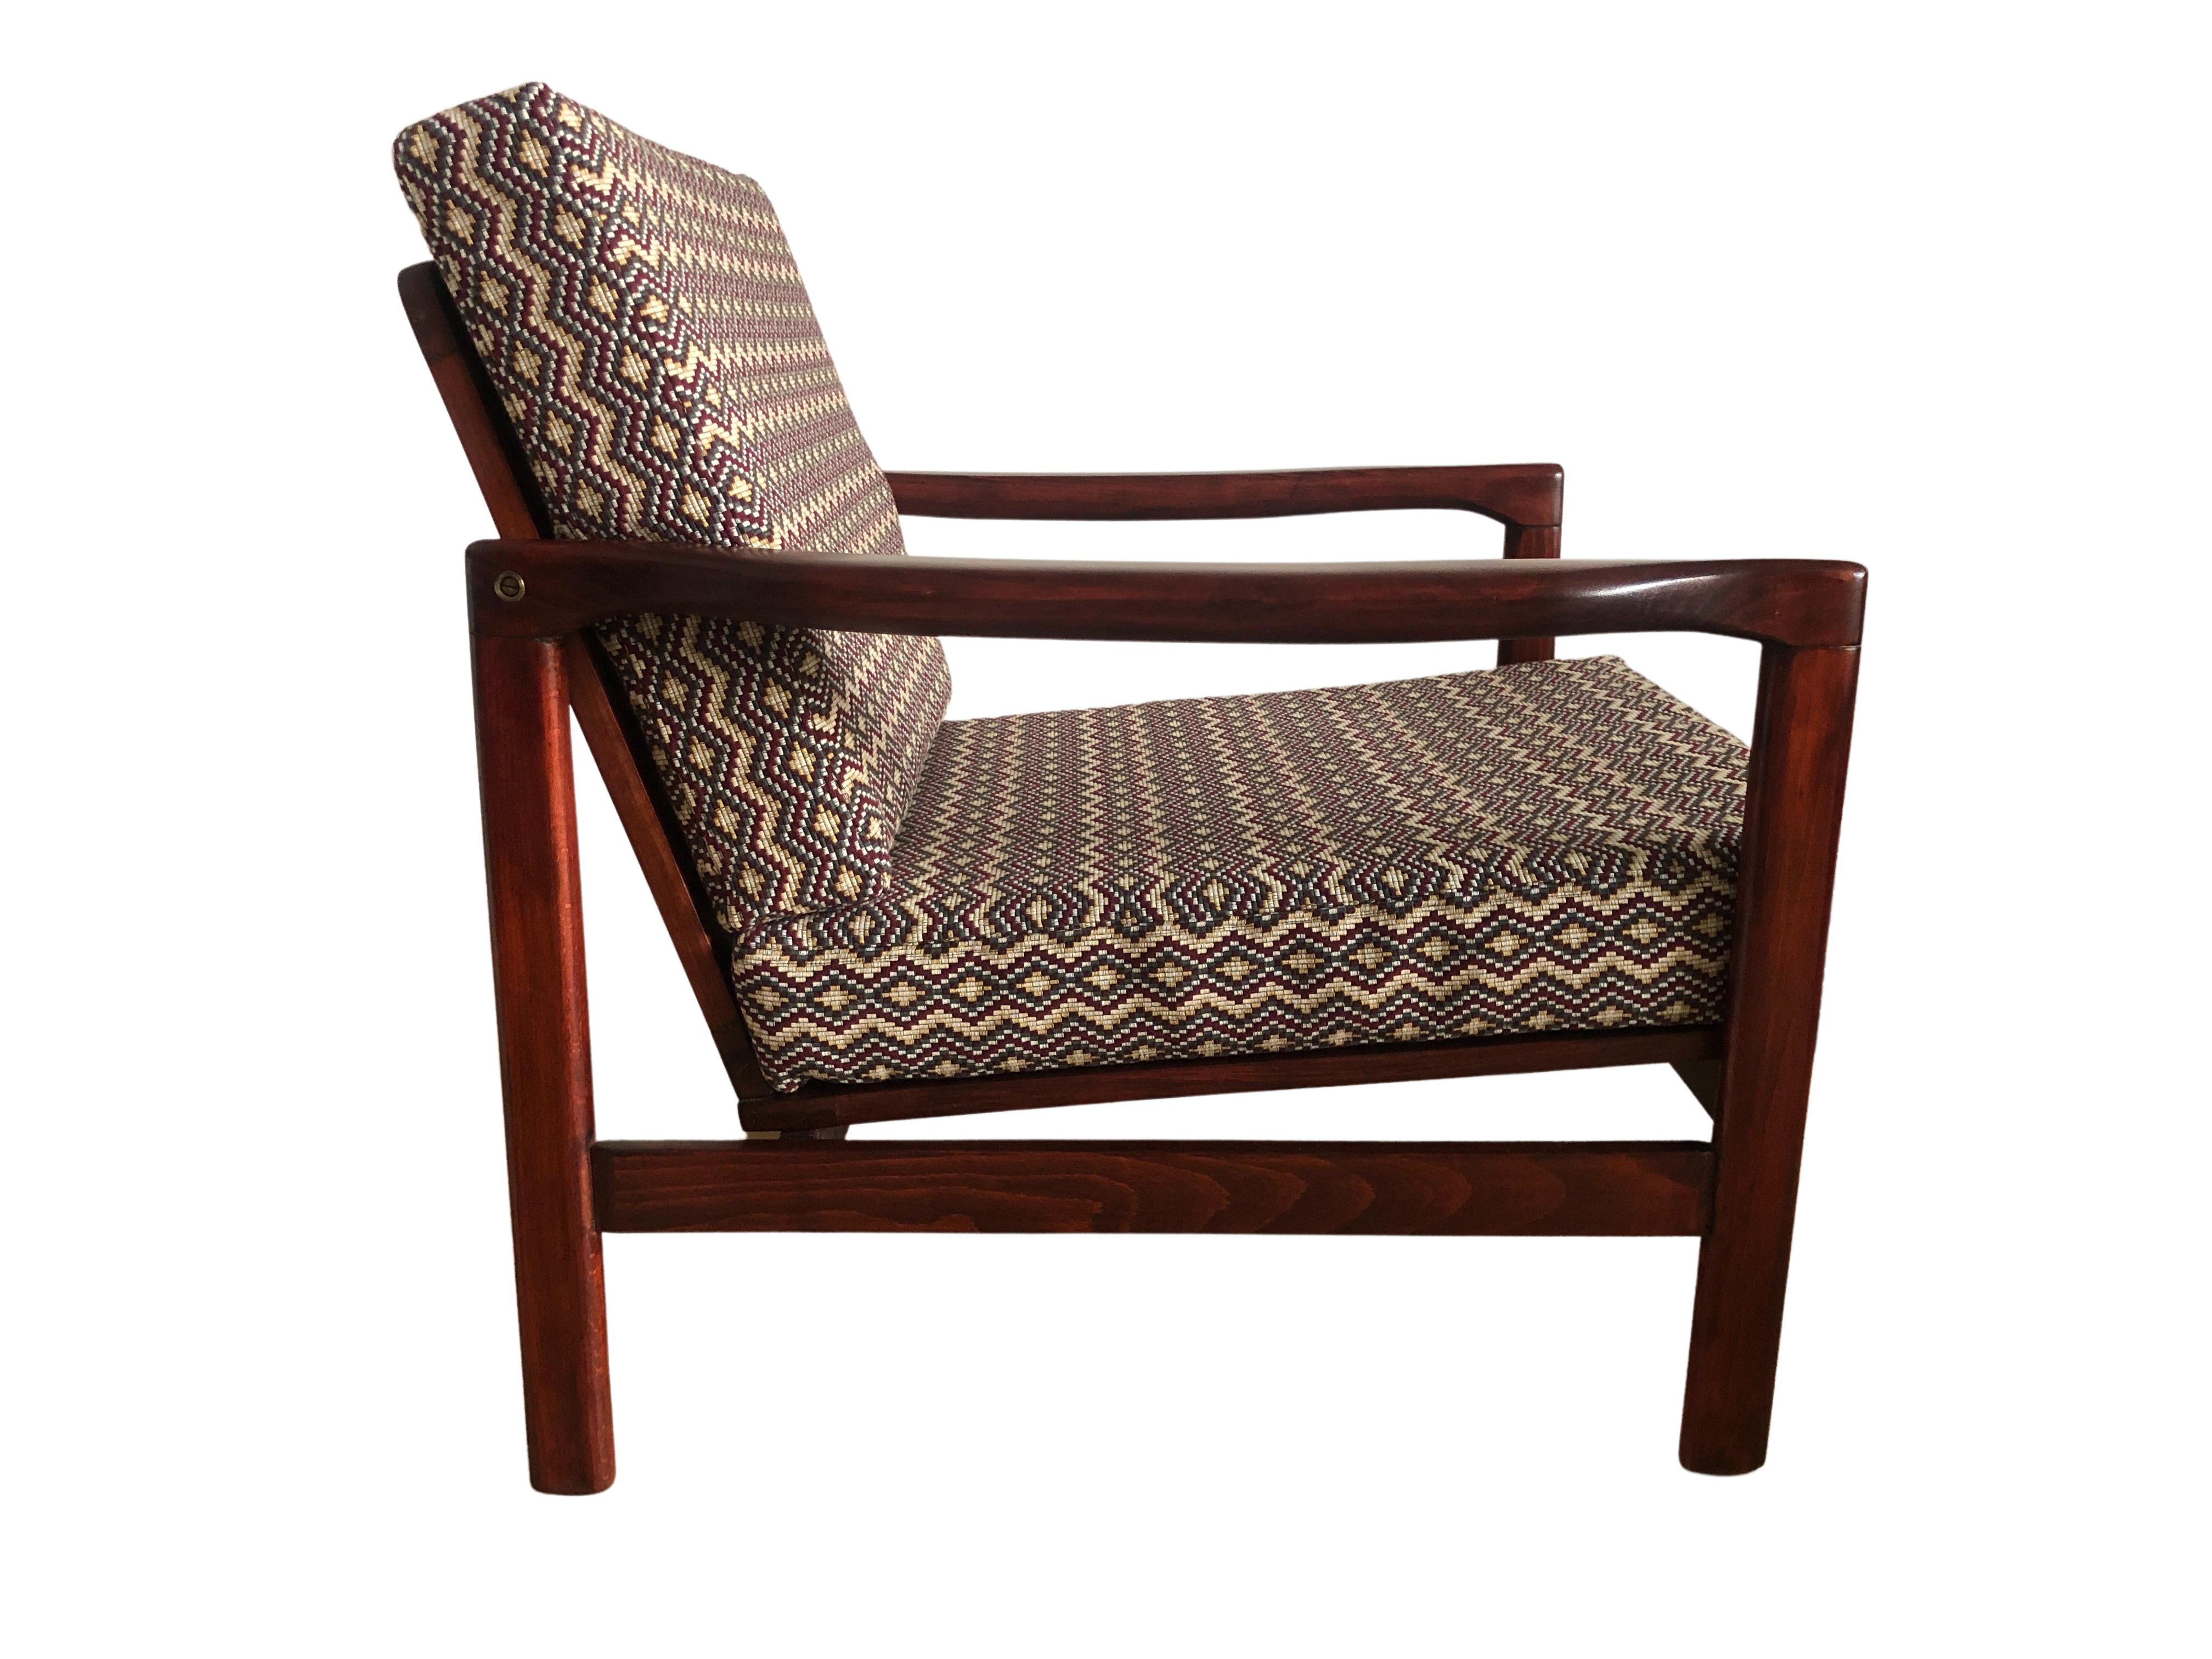 The lounge chair model B-7752, designed by Zenon Baczyk, has been manufactured by Swarzedzkie Fabryki Mebli in Poland in the 1960s. 

The structure is made of beech wood in deep brown color, finished with a semi matte varnish. 

The upholstery